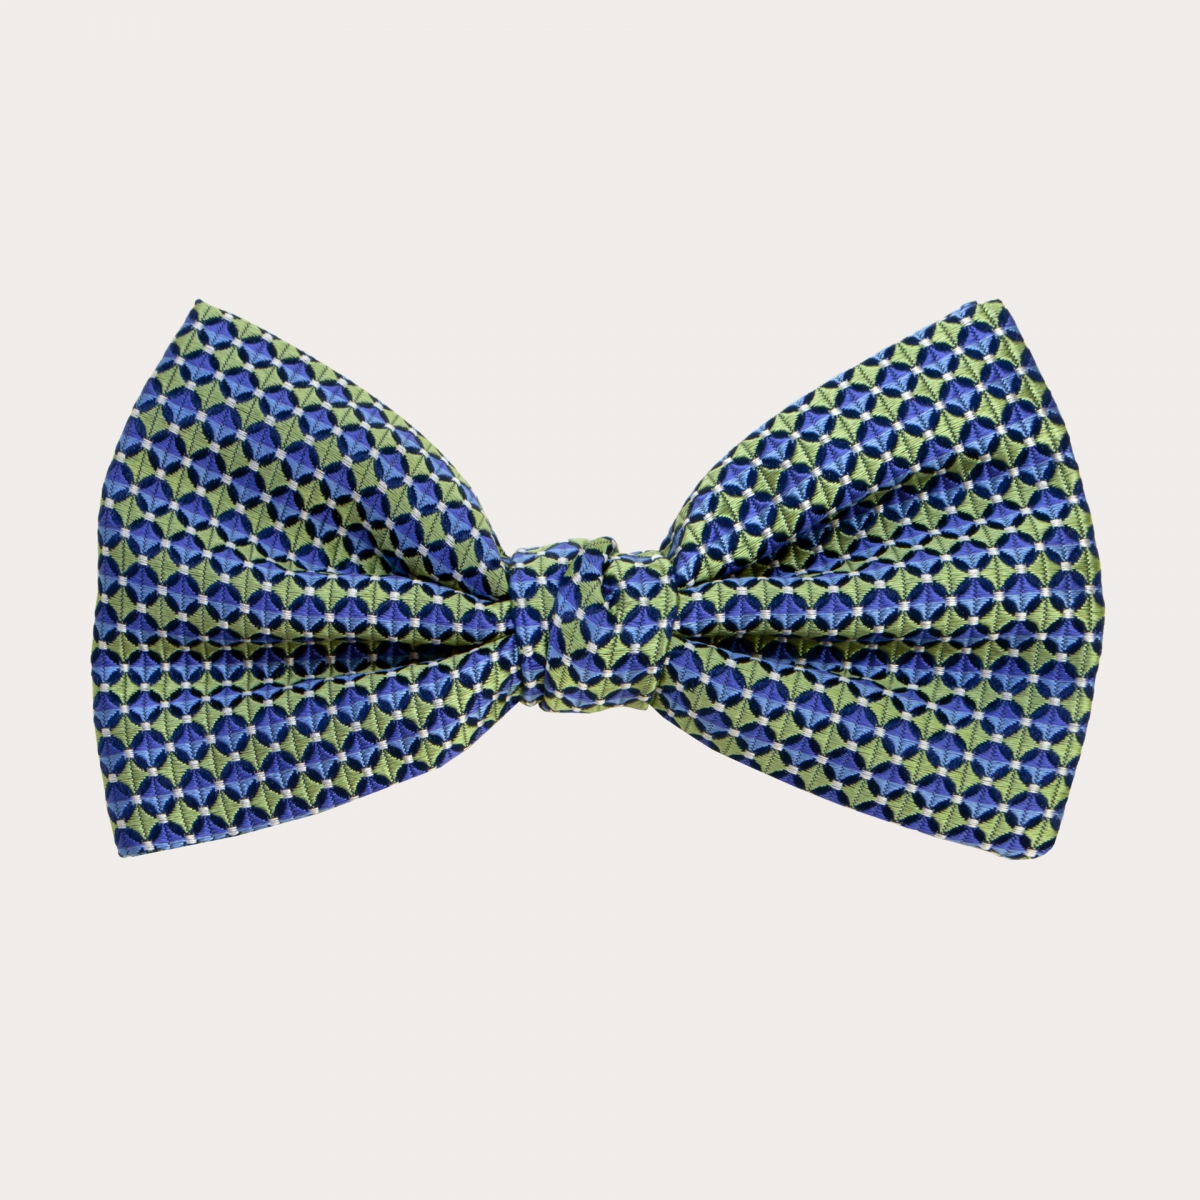 Silk pre-tied bow tie, light blue with squares pattern